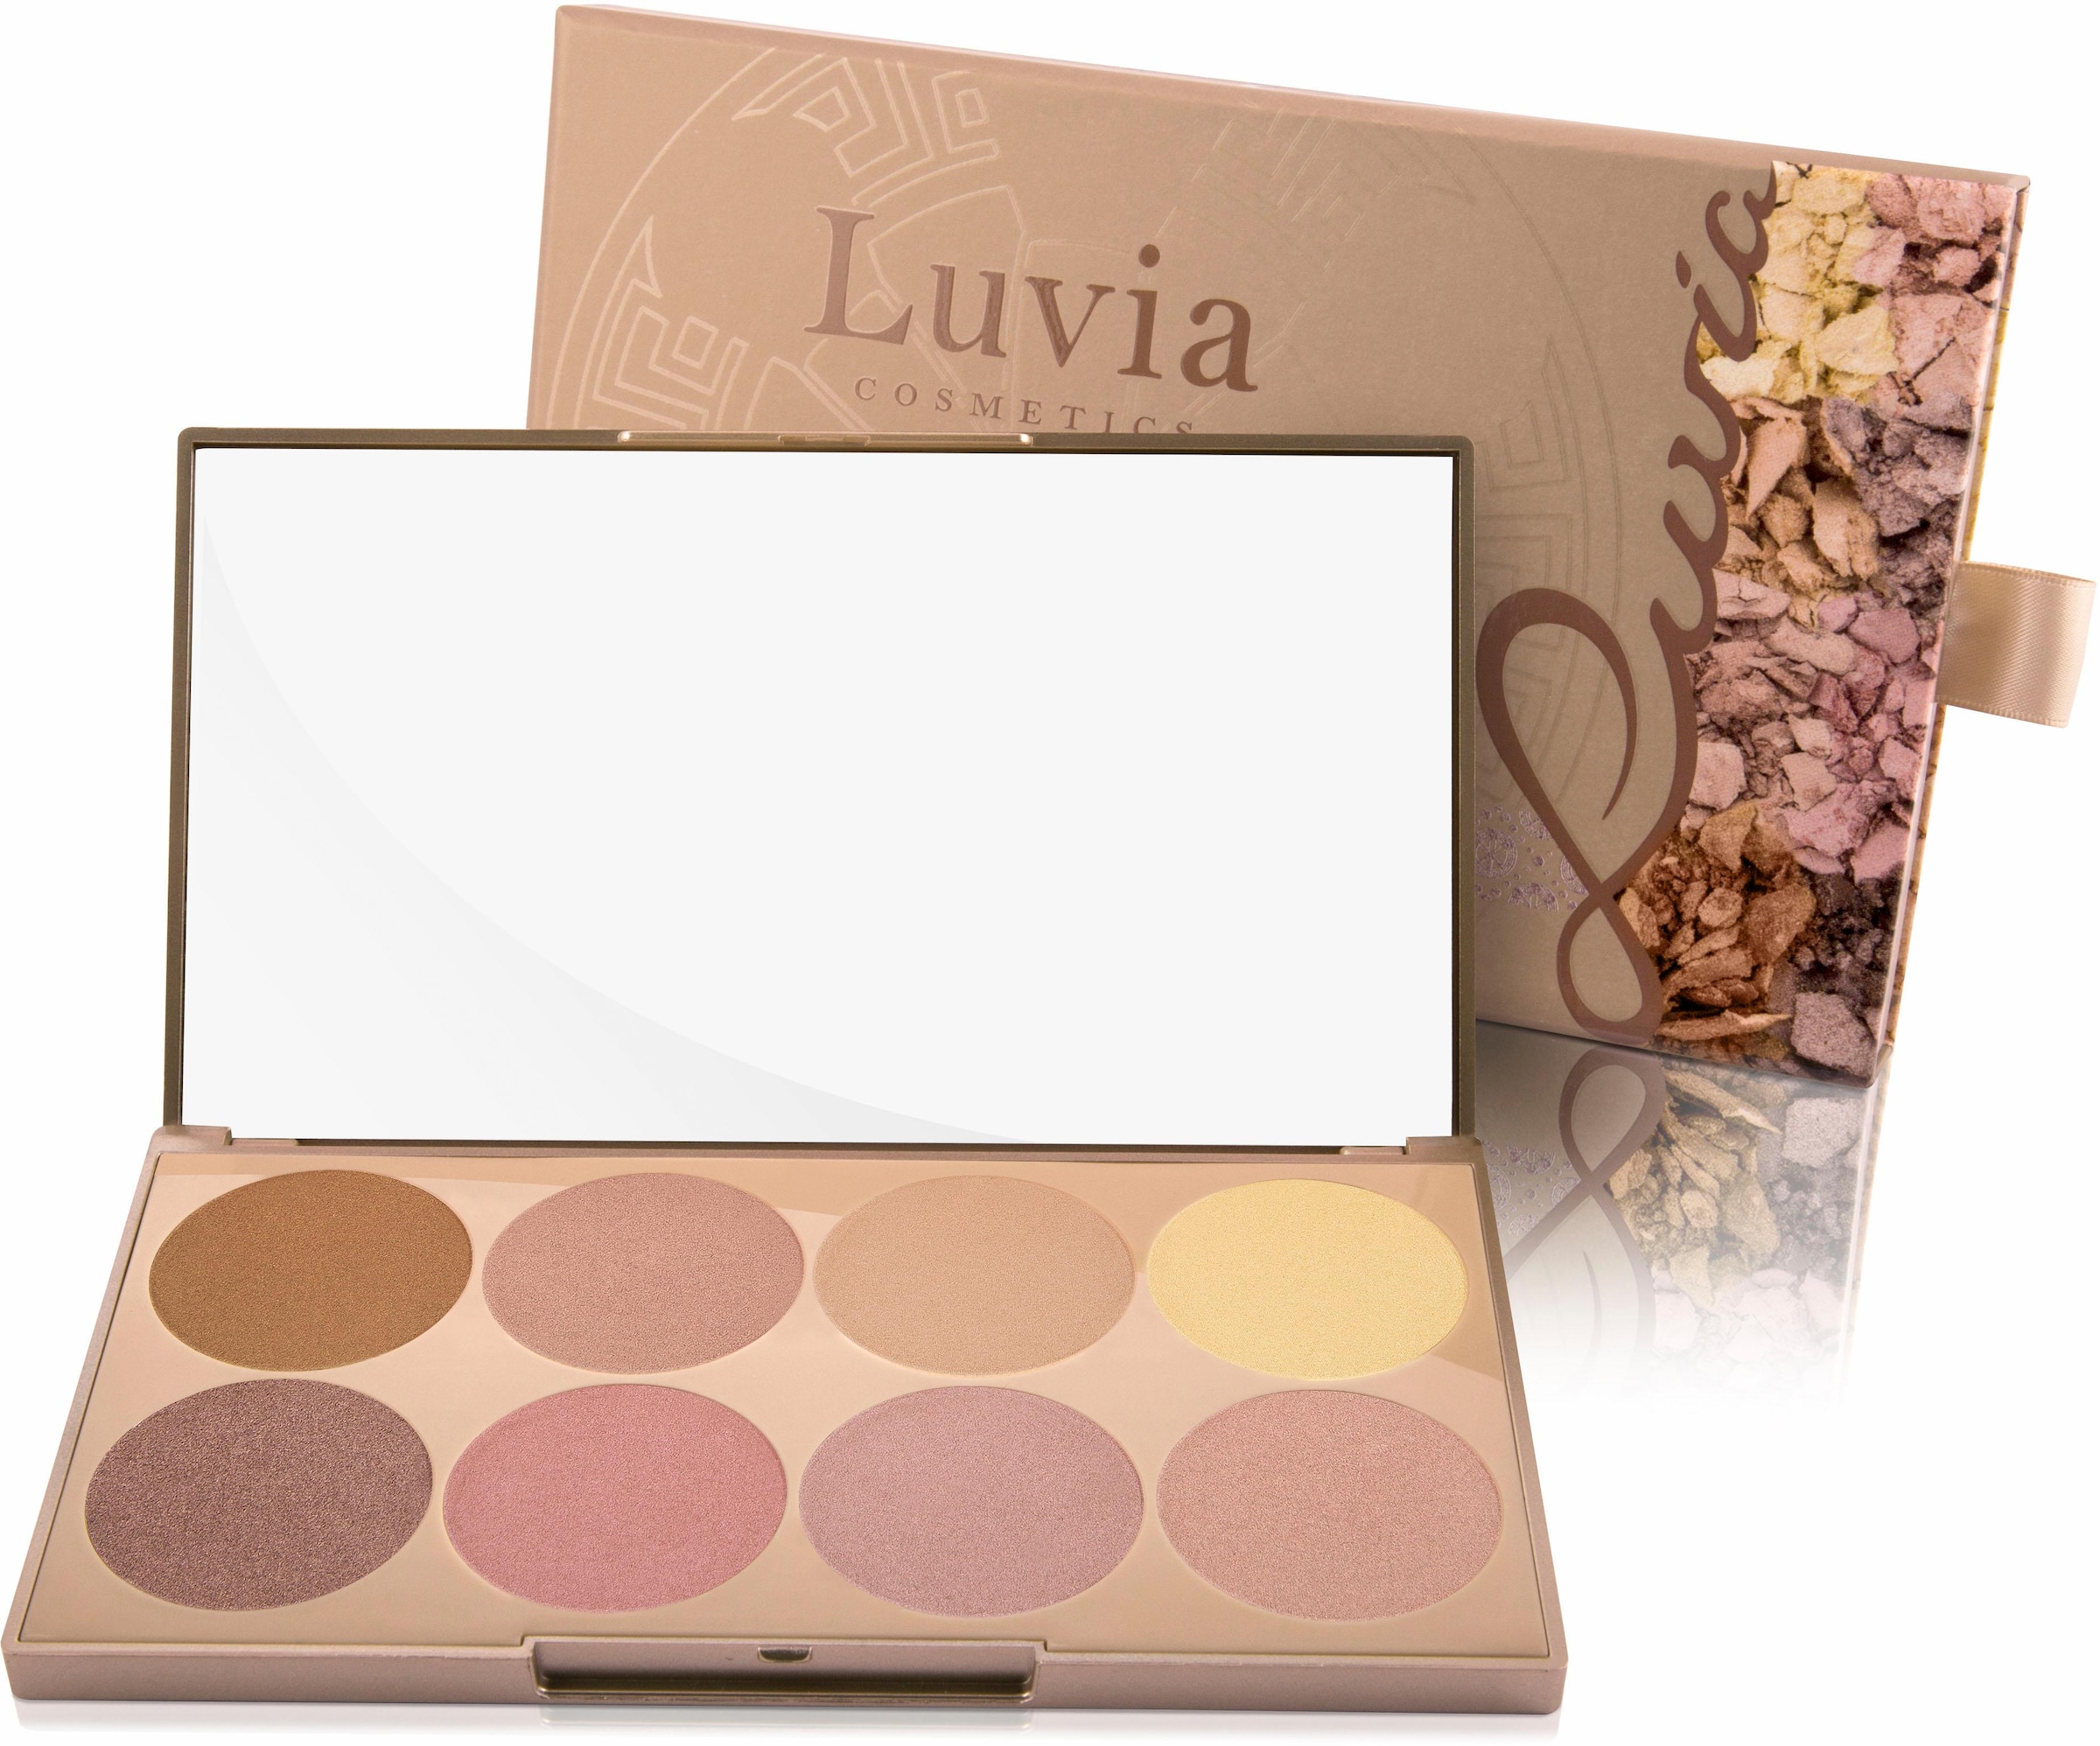 Luvia Cosmetics Highlighter-Palette »Prime Farben Shades Glow Vol. 1« Contouring Essential (8 8 tlg.)